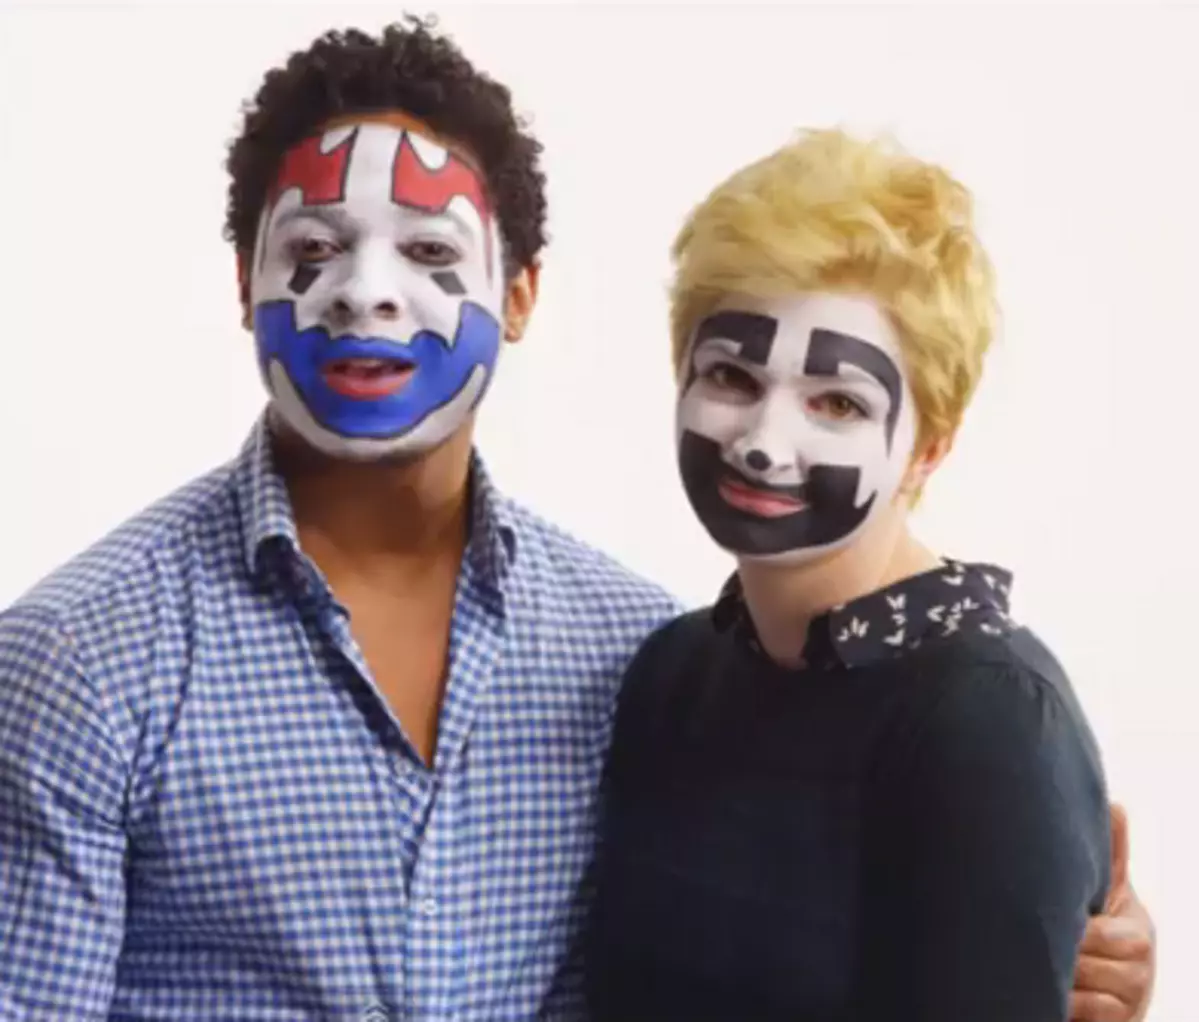 dating websites for clowns